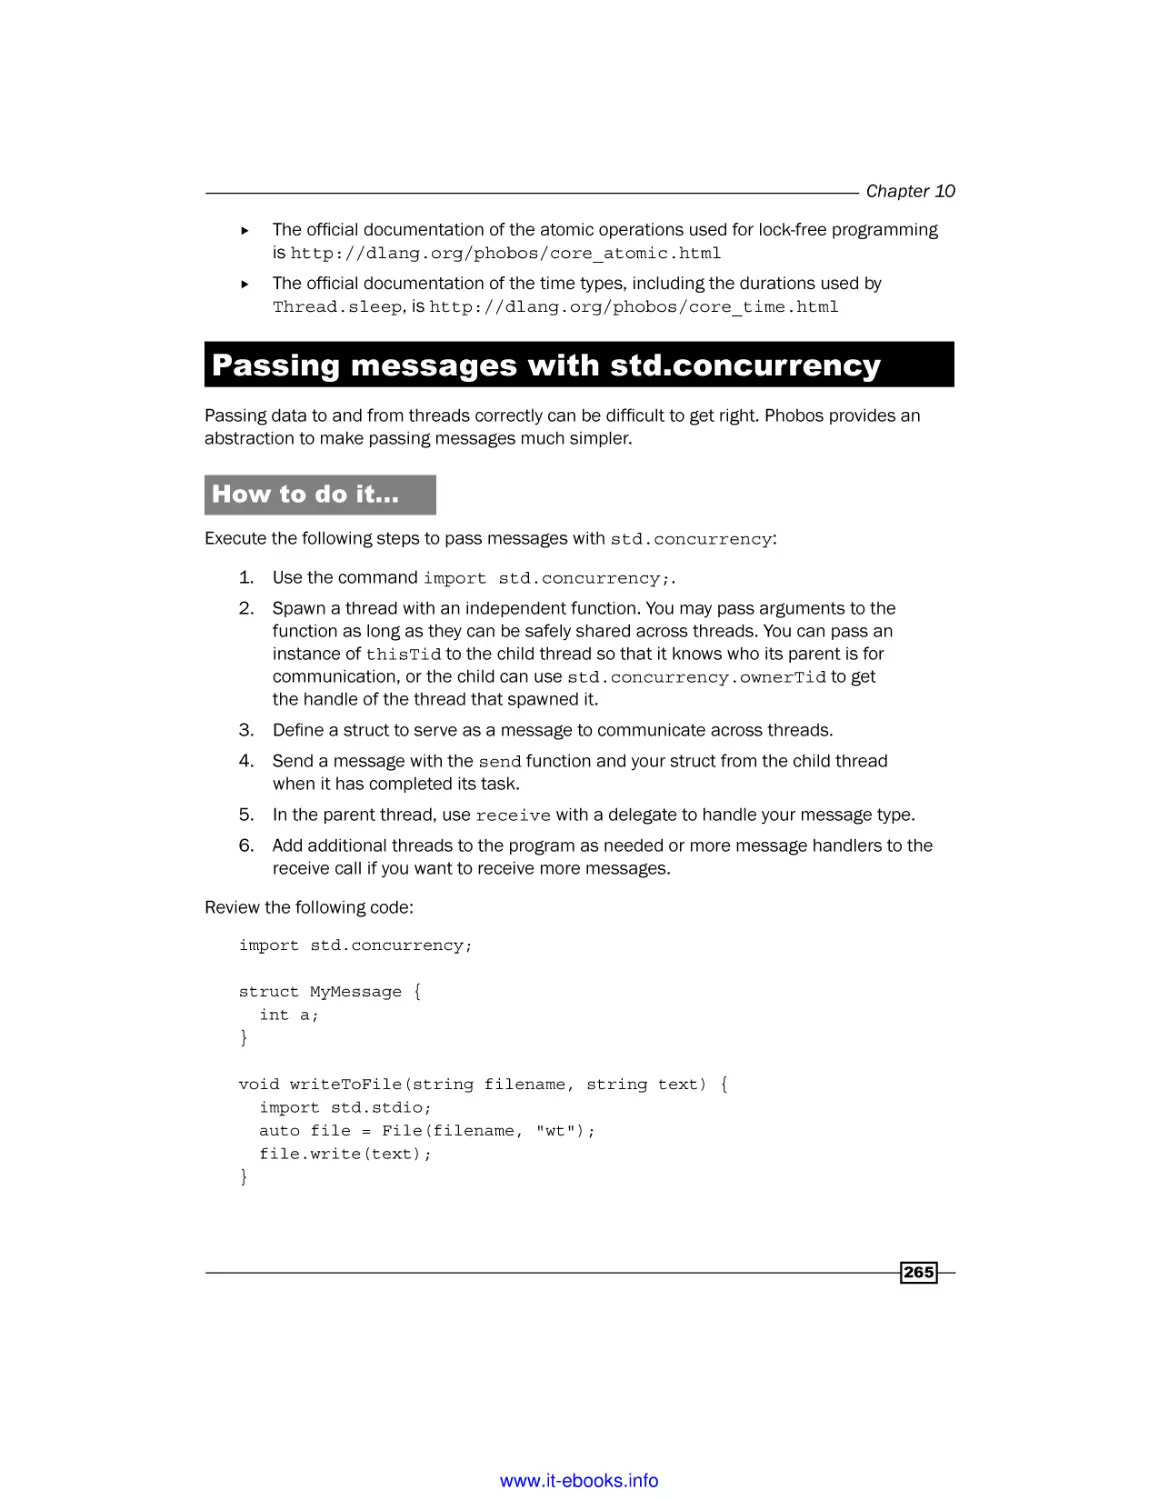 Passing messages with std.concurrency